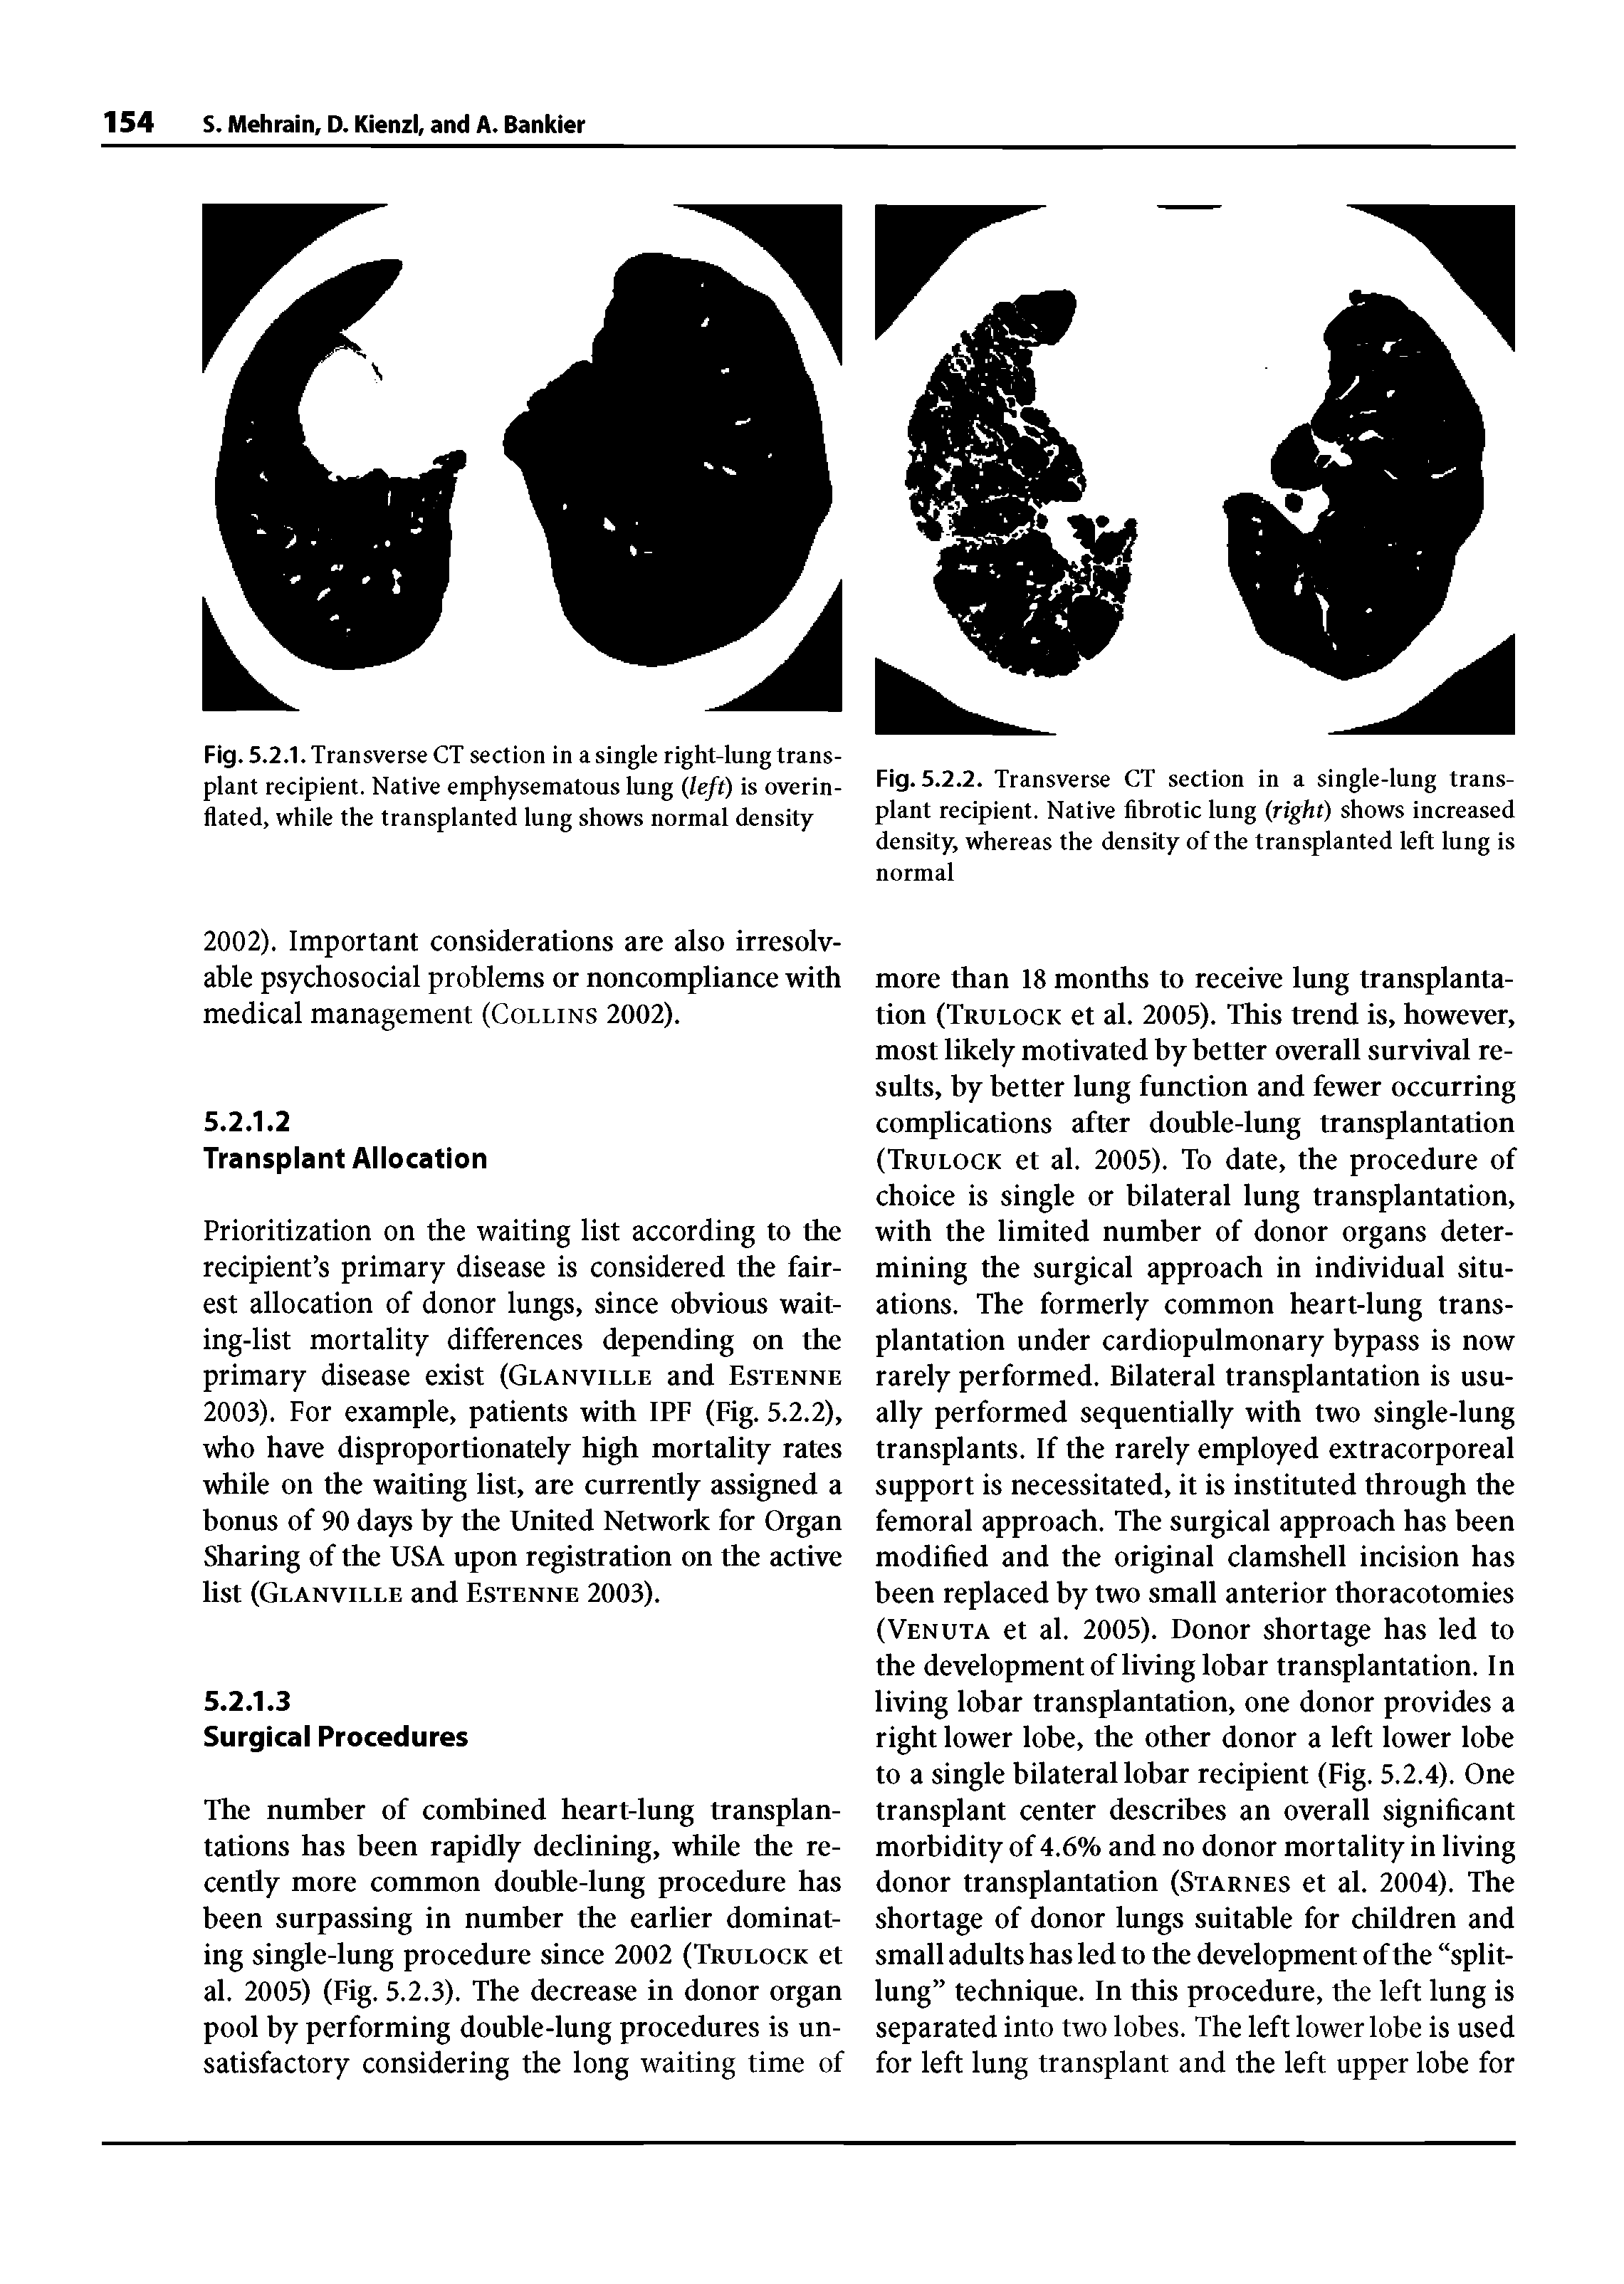 Fig. 5.2.2. Transverse CT section in a single-lung transplant recipient. Native lihrotic lung (right) shows increased density, whereas the density of the transplanted left lung is normal...